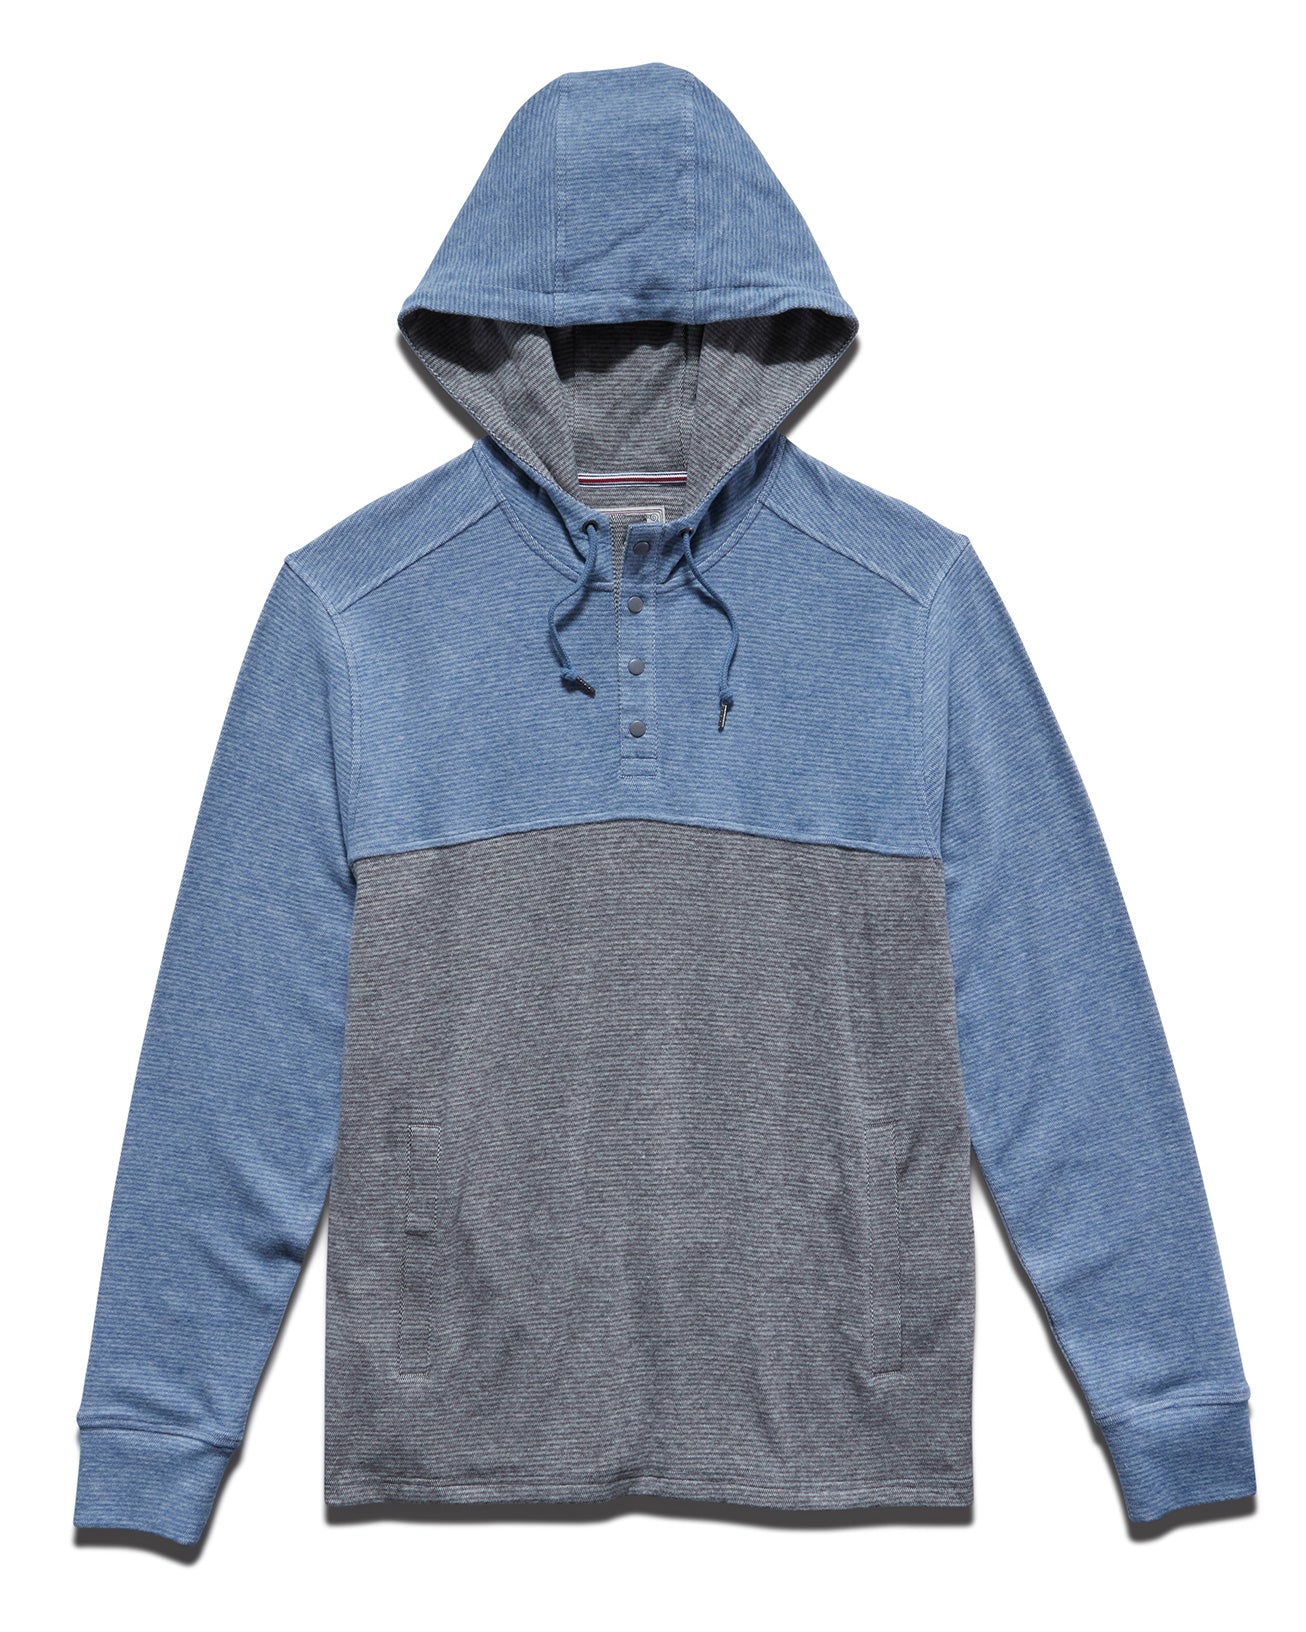 HIGHFILL SUPER-SOFT COLORBLOCK HOODED HENLEY